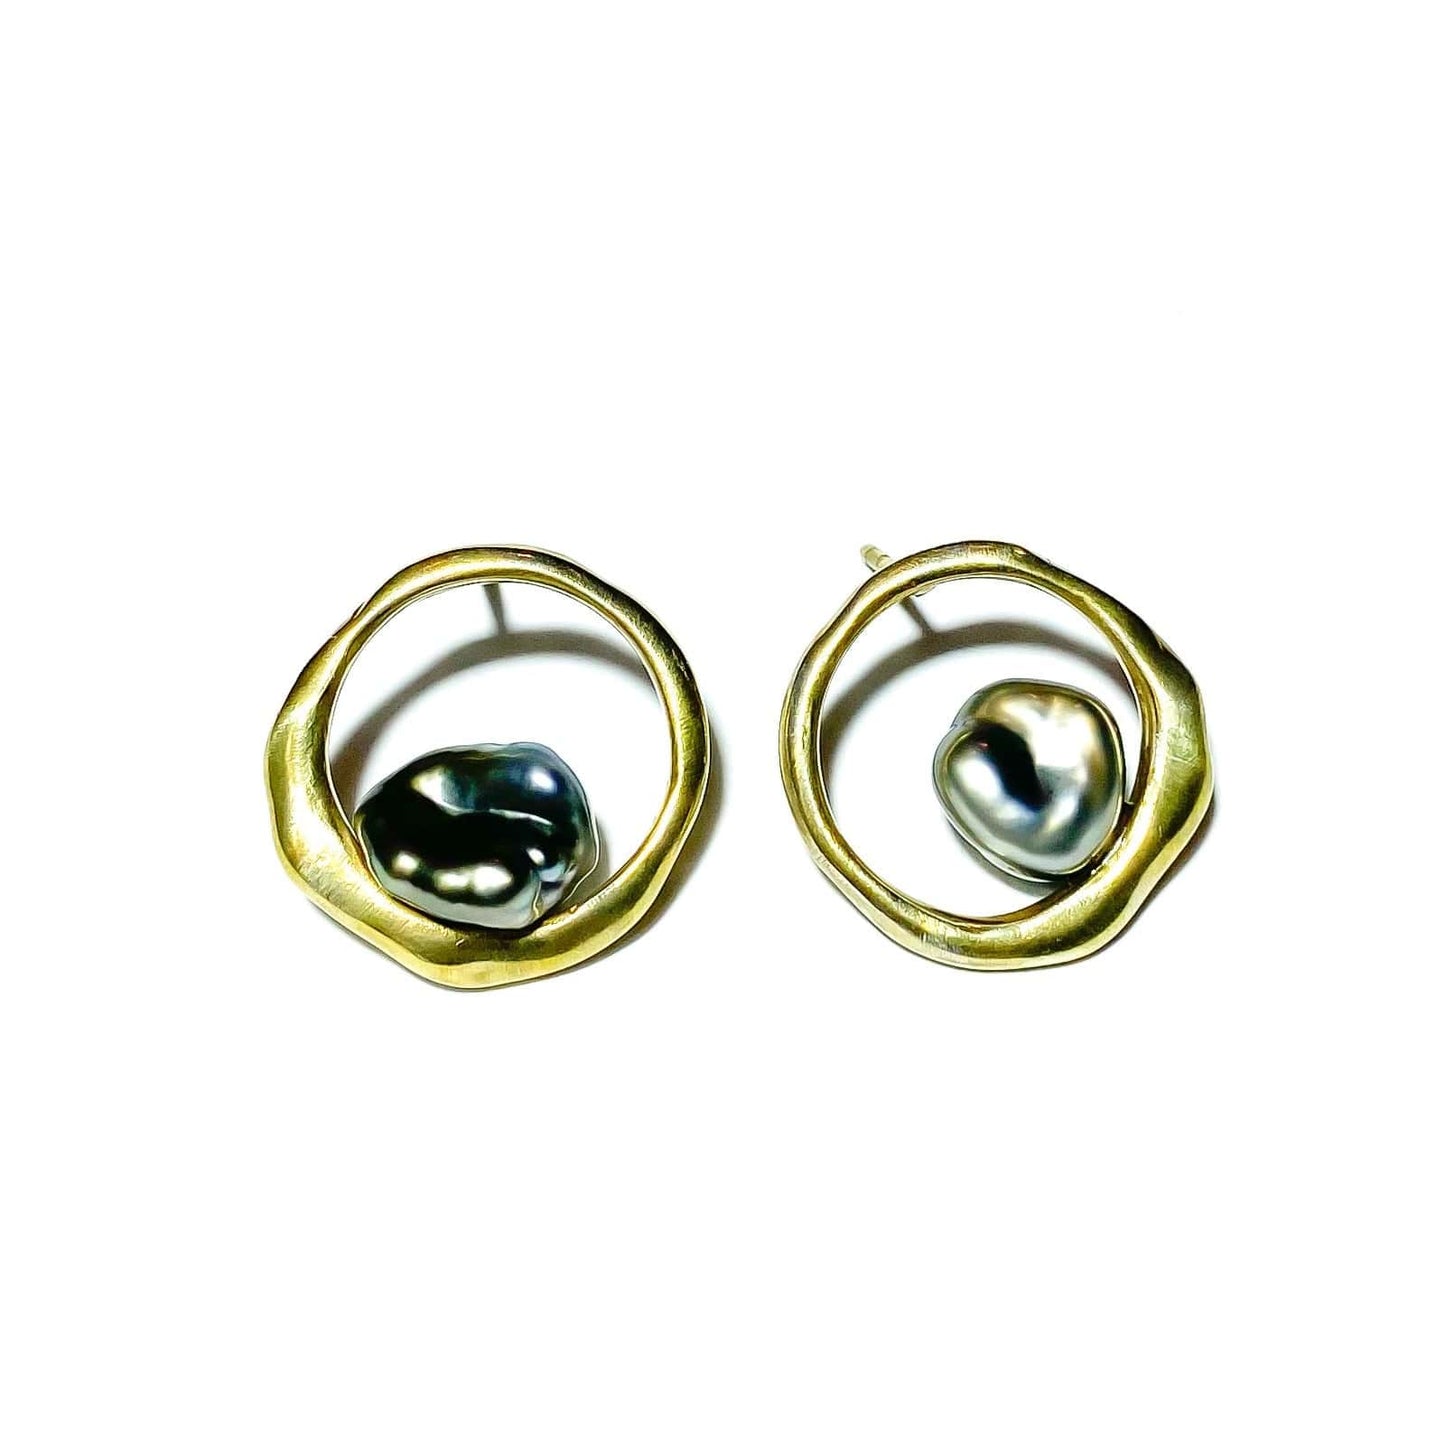 Keshi Curves gold plated silver earrings.